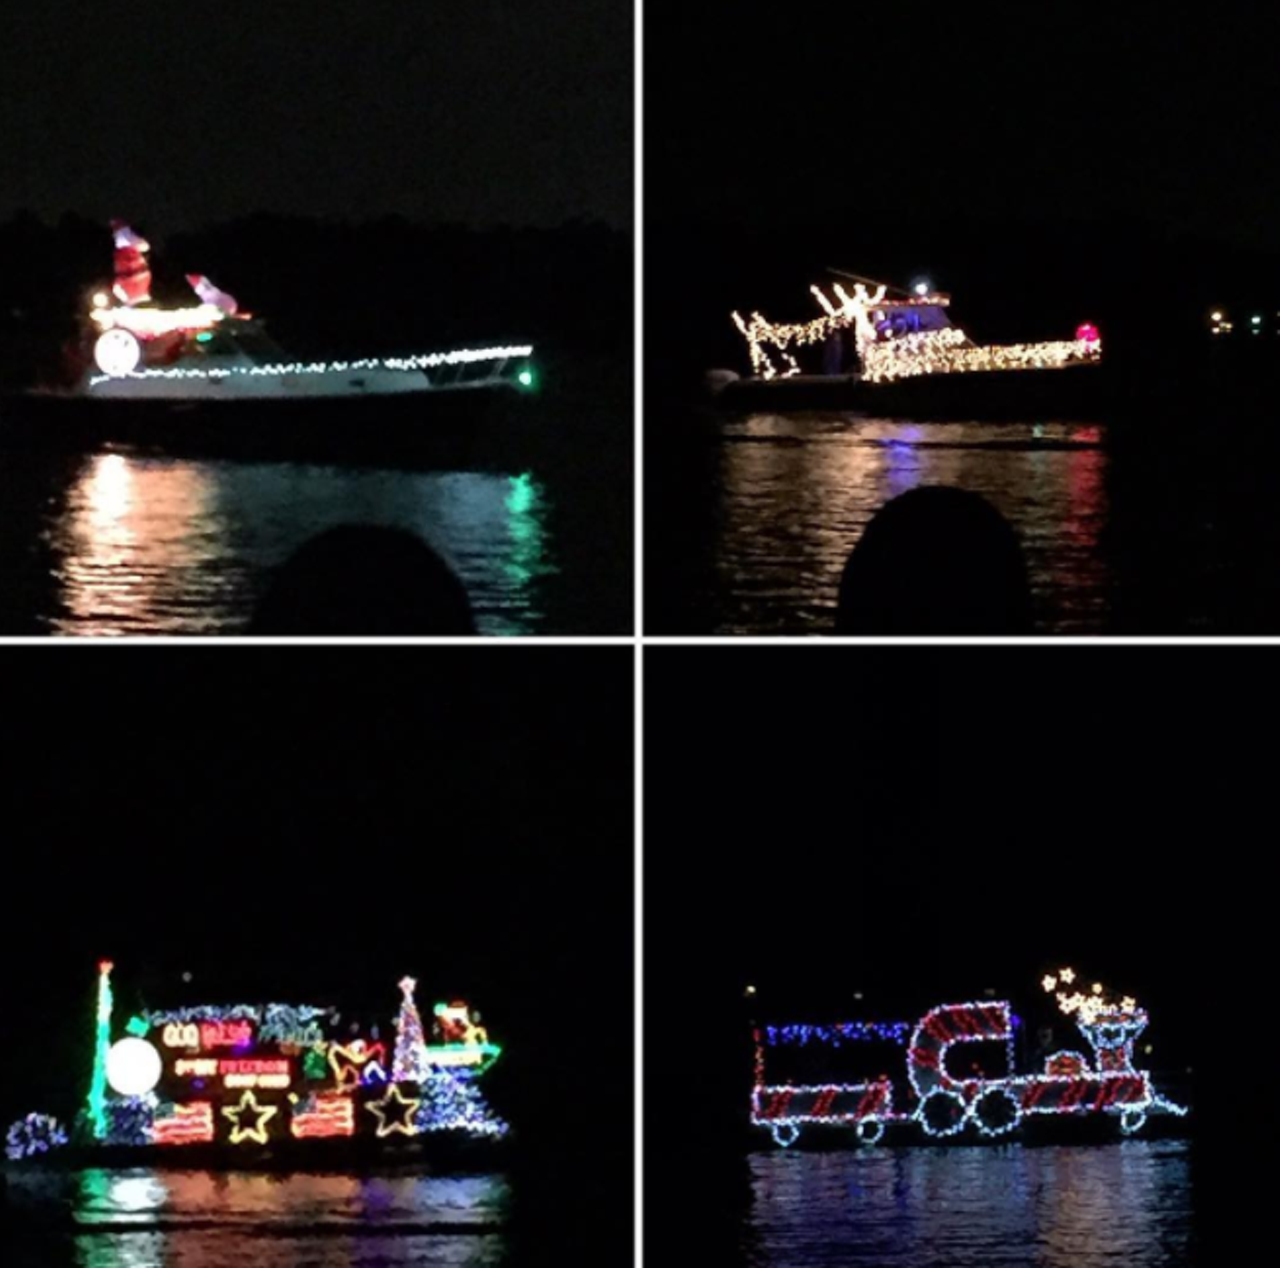 All boats have an excessive amount of Christmas lights 
Photo via lalaliving/Instagram